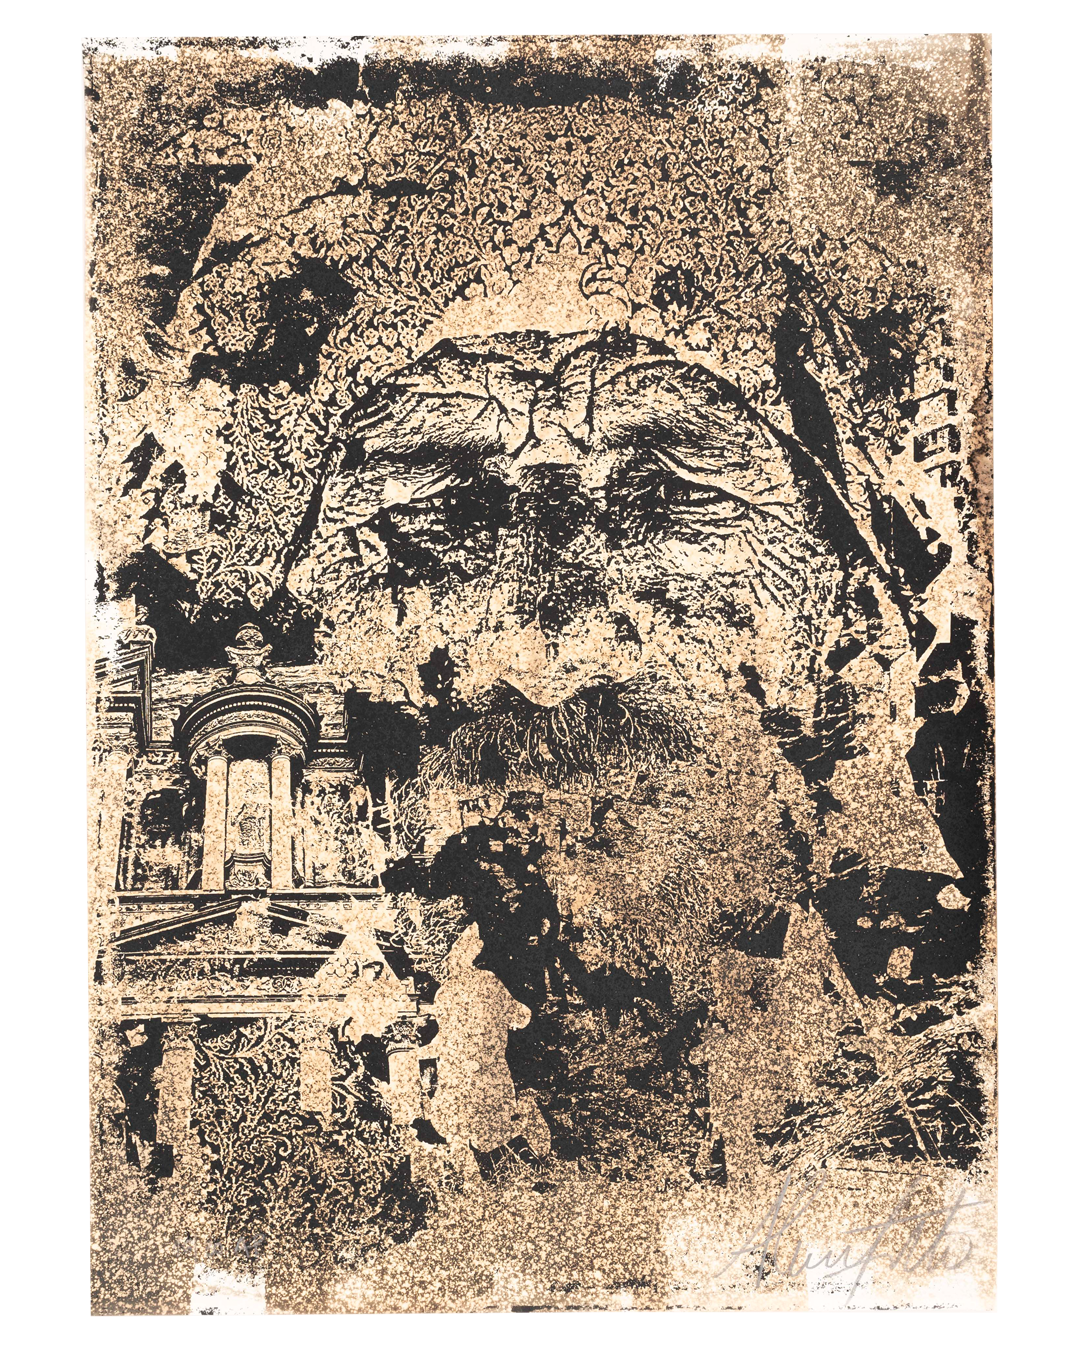 Limited edition print by Vhils for The Jaunt of an elderman with facial hair and the silhouette of a building overlaid on his face. 